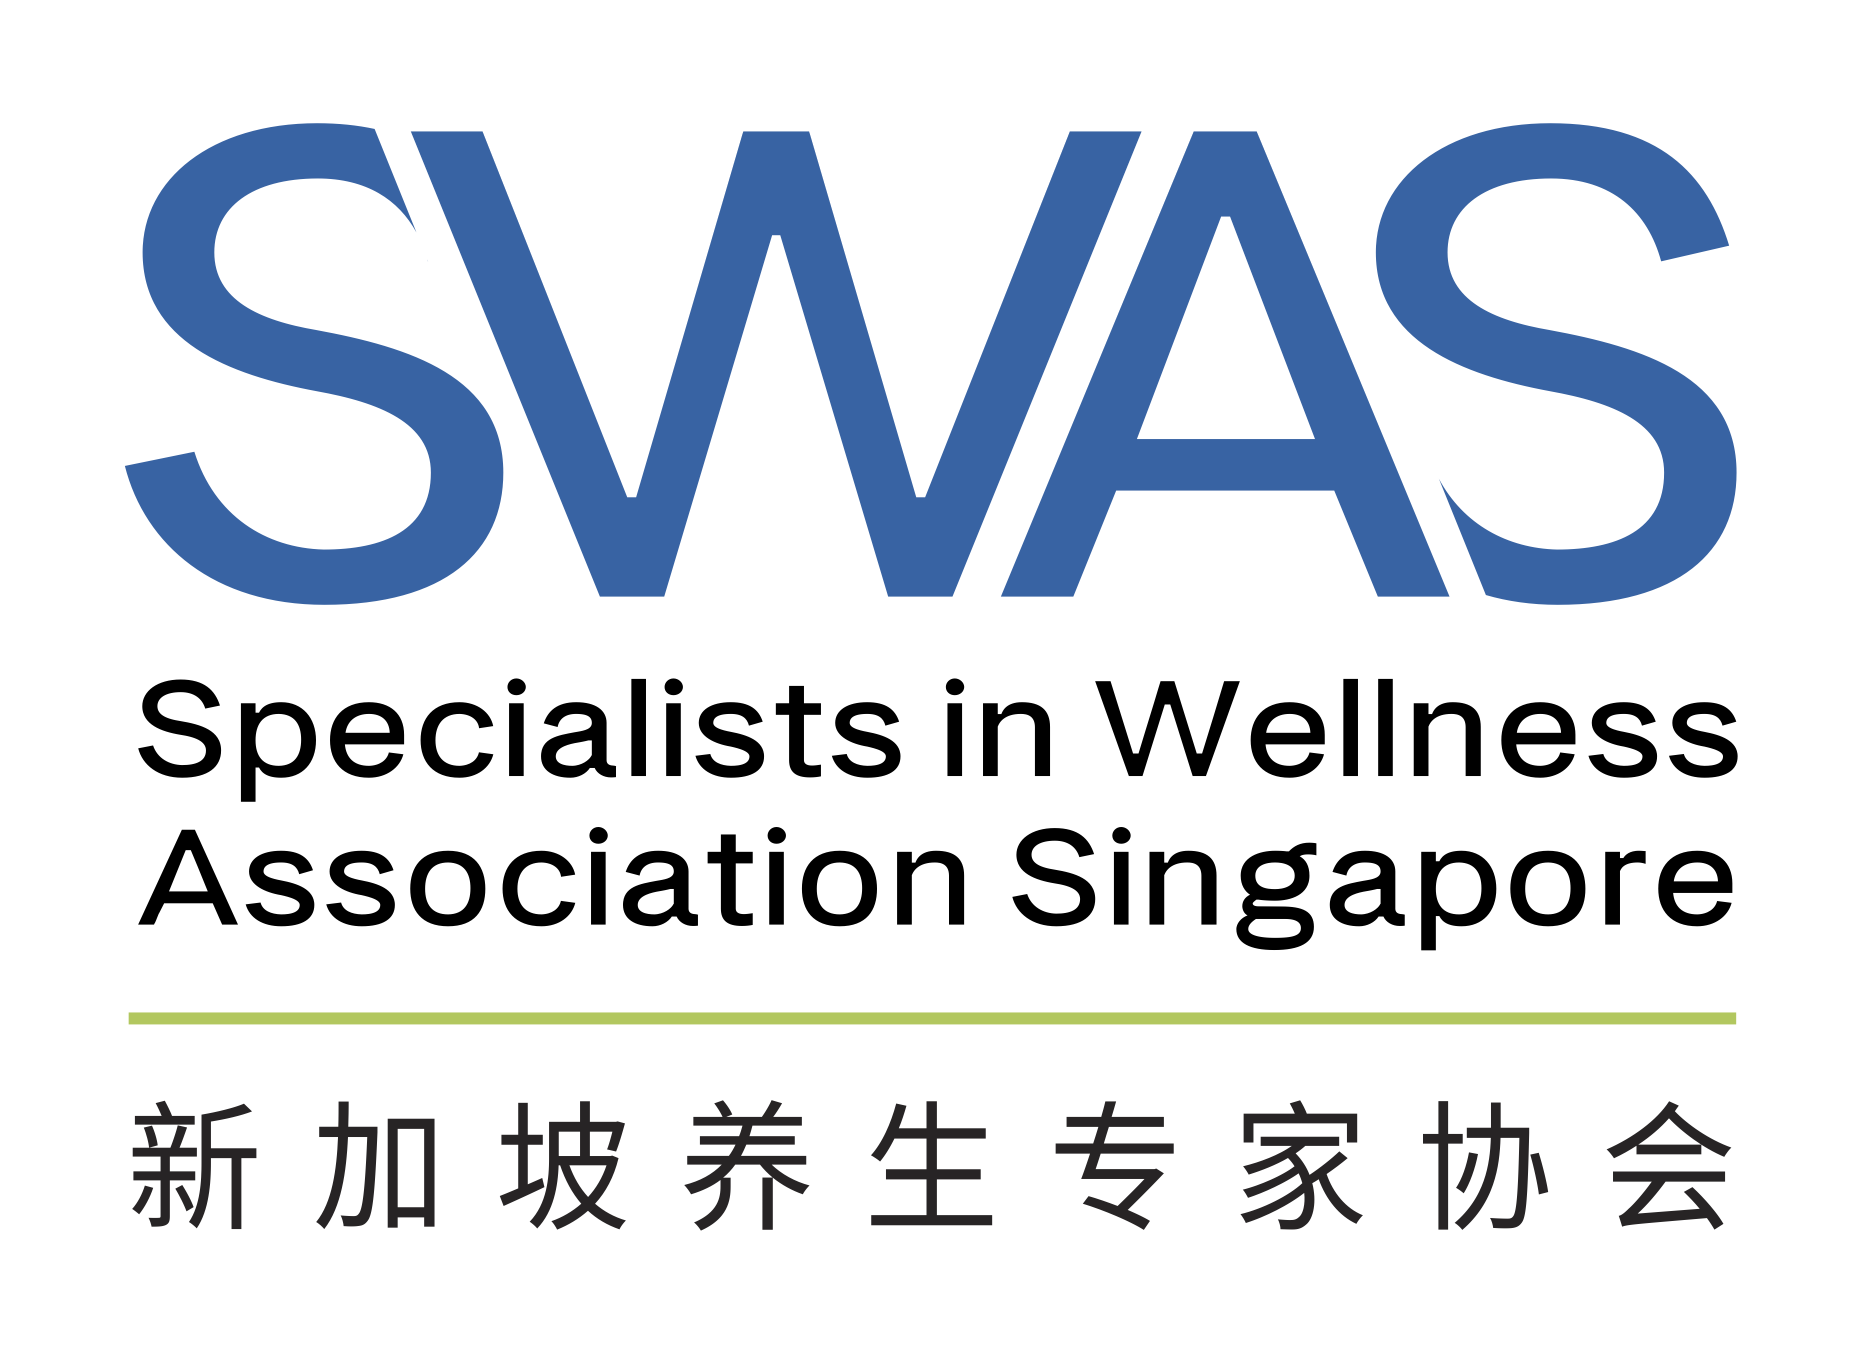 Specialists in Wellness Association Singapore